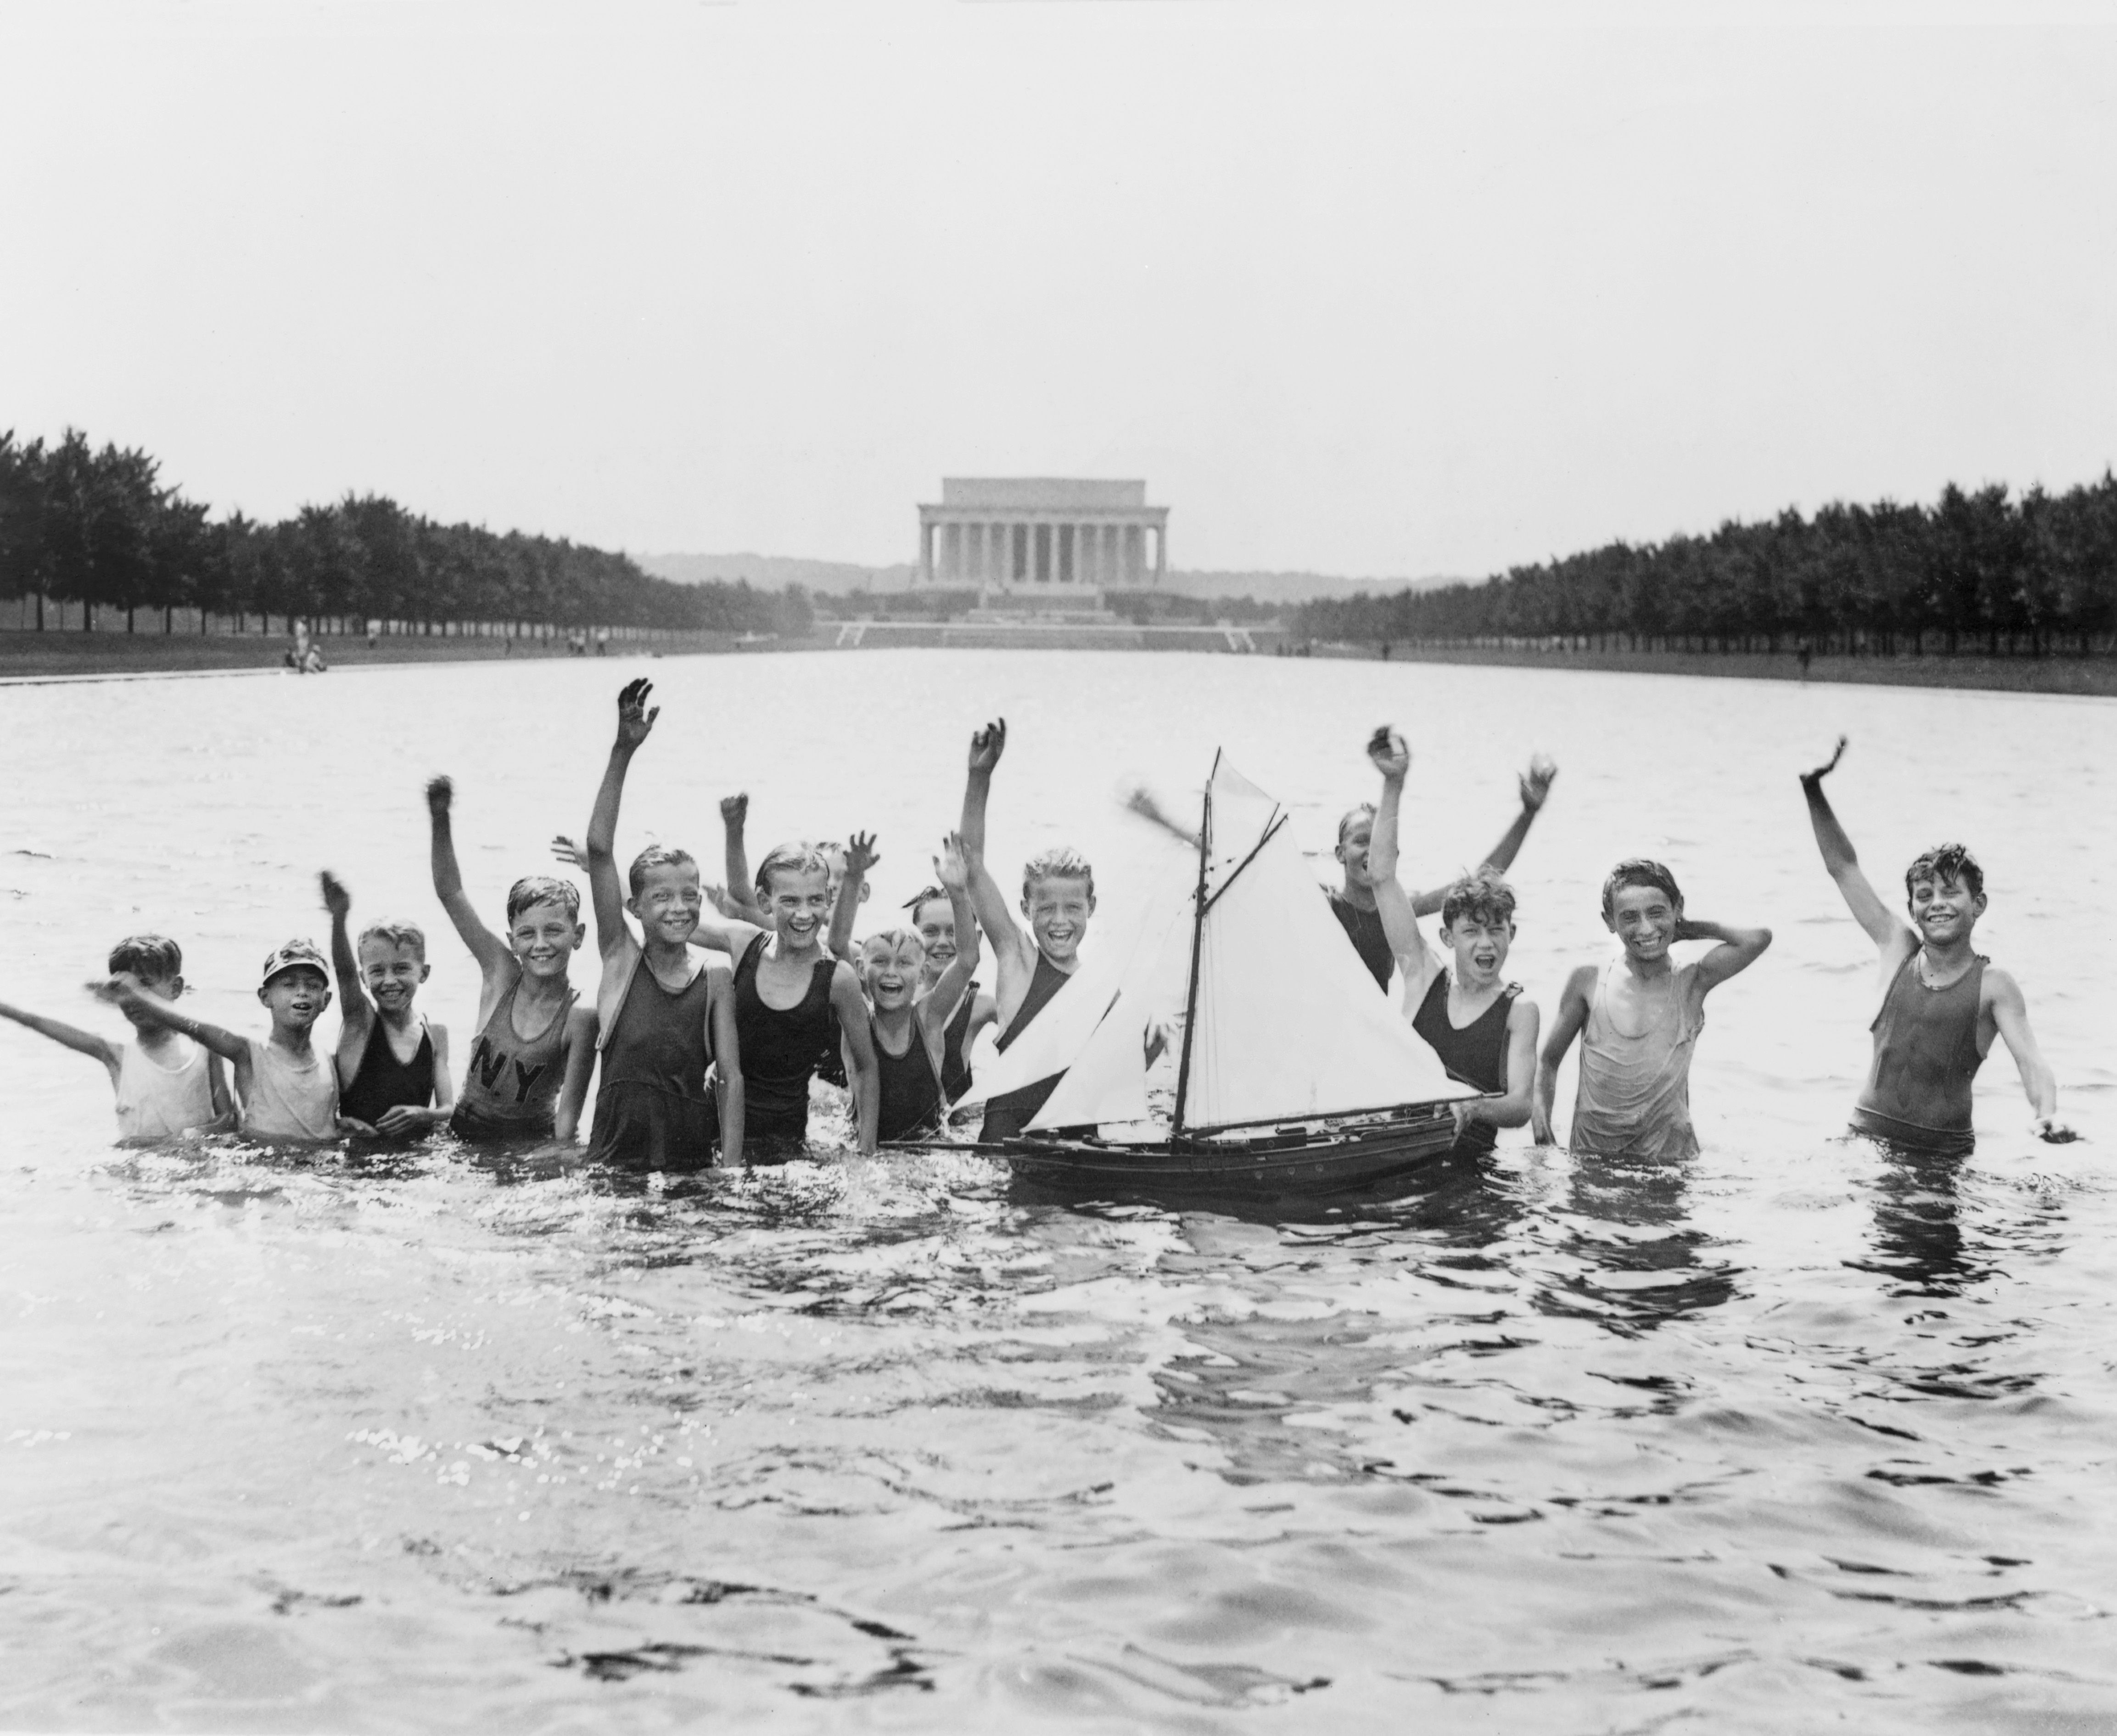 A group of boys waving at camera while Playing with a toy sailboat in the Reflecting Pool in front of the Lincoln Memorial, Washington DC, July 7, 1926 . 